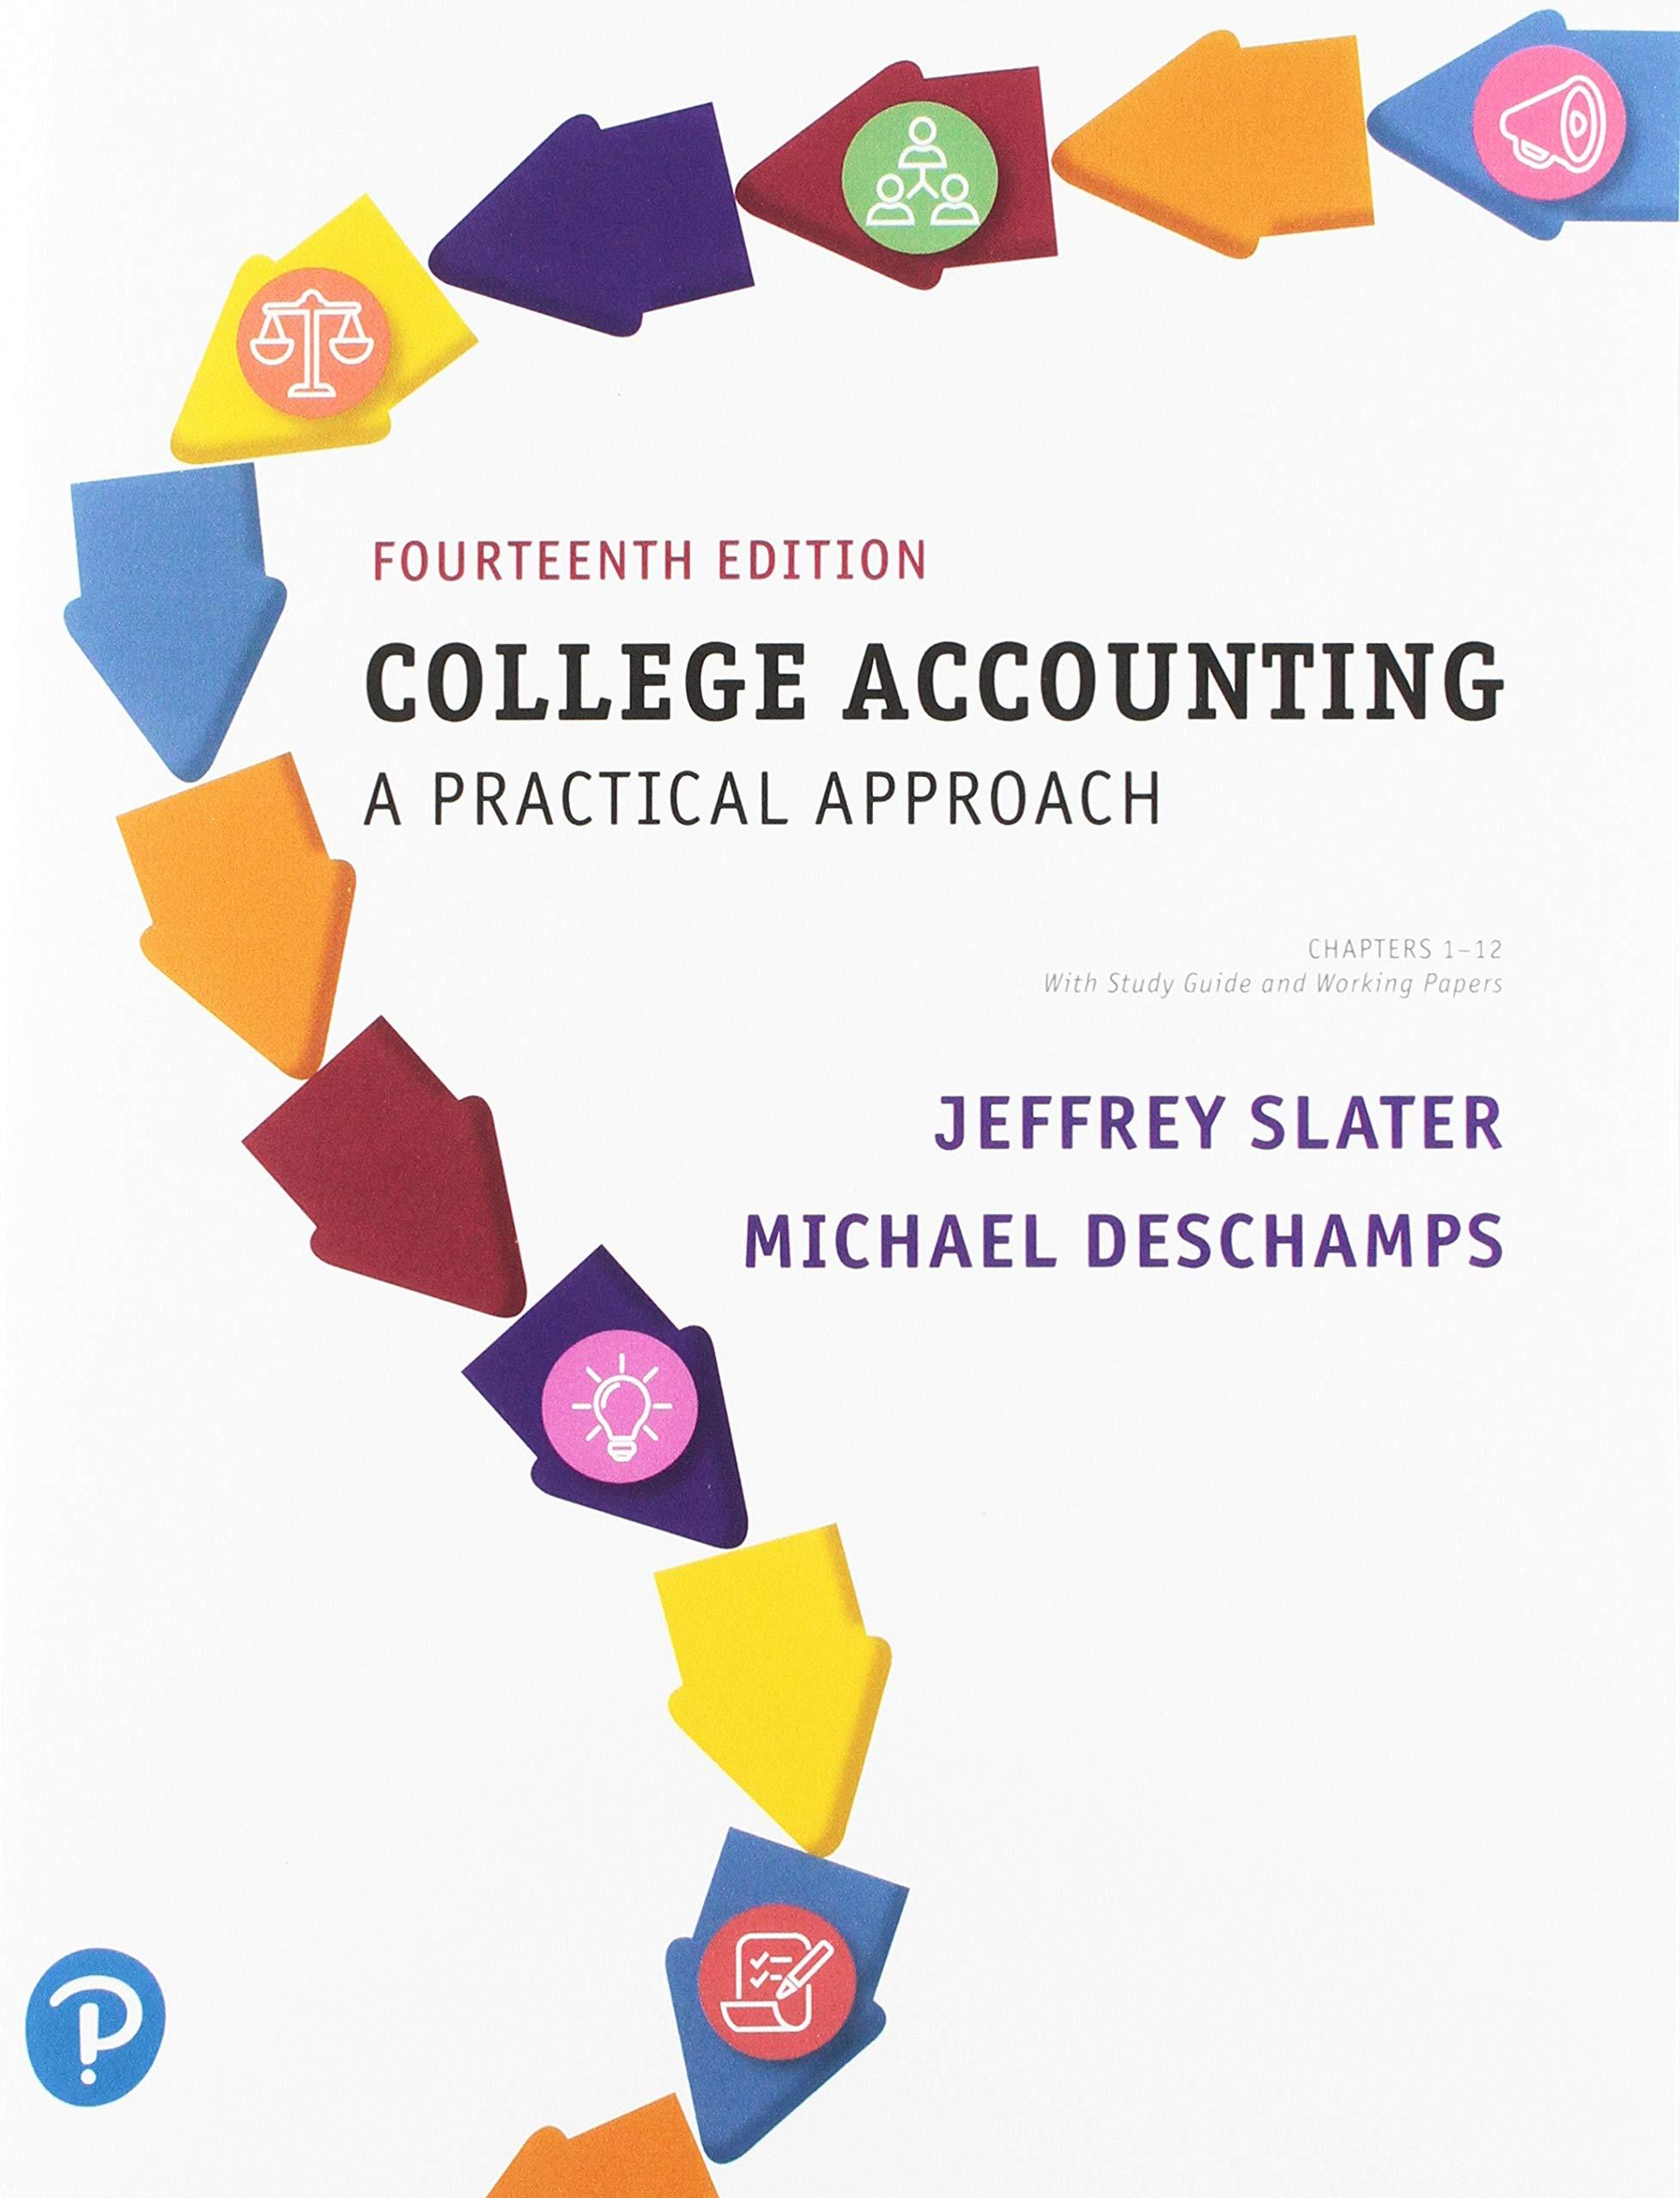 college accounting a practical approach chapters 1-12 with study guide and working papers 14th edition